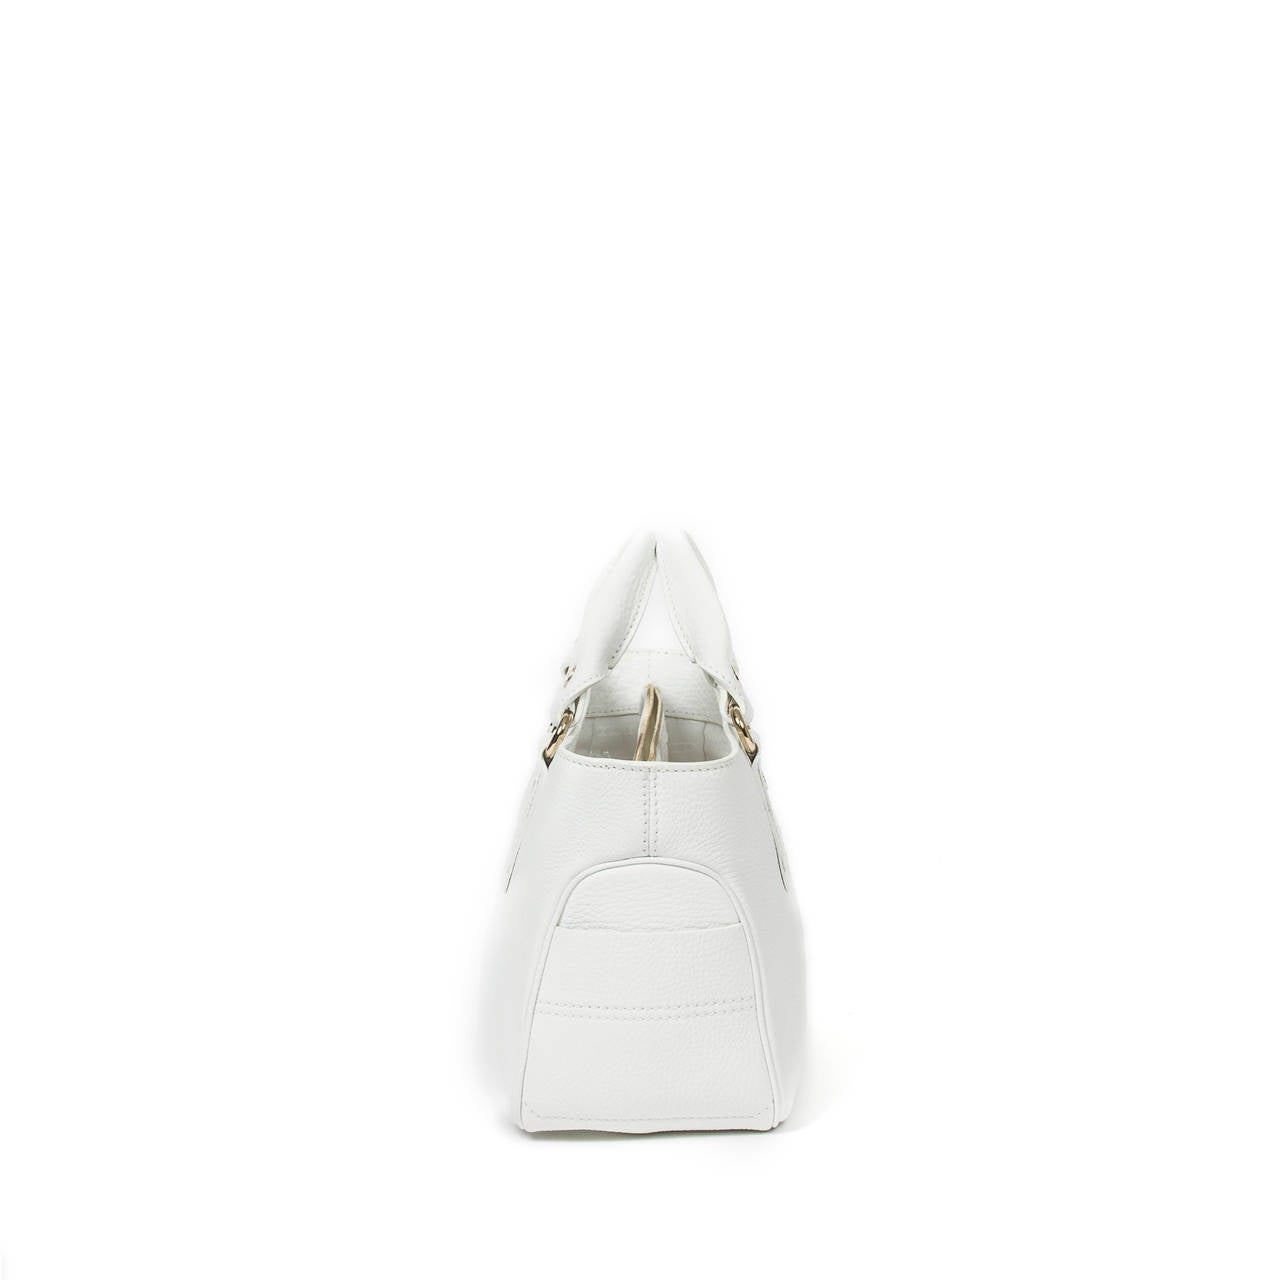 Celine Boogie Bag White In Excellent Condition For Sale In Dublin, IE